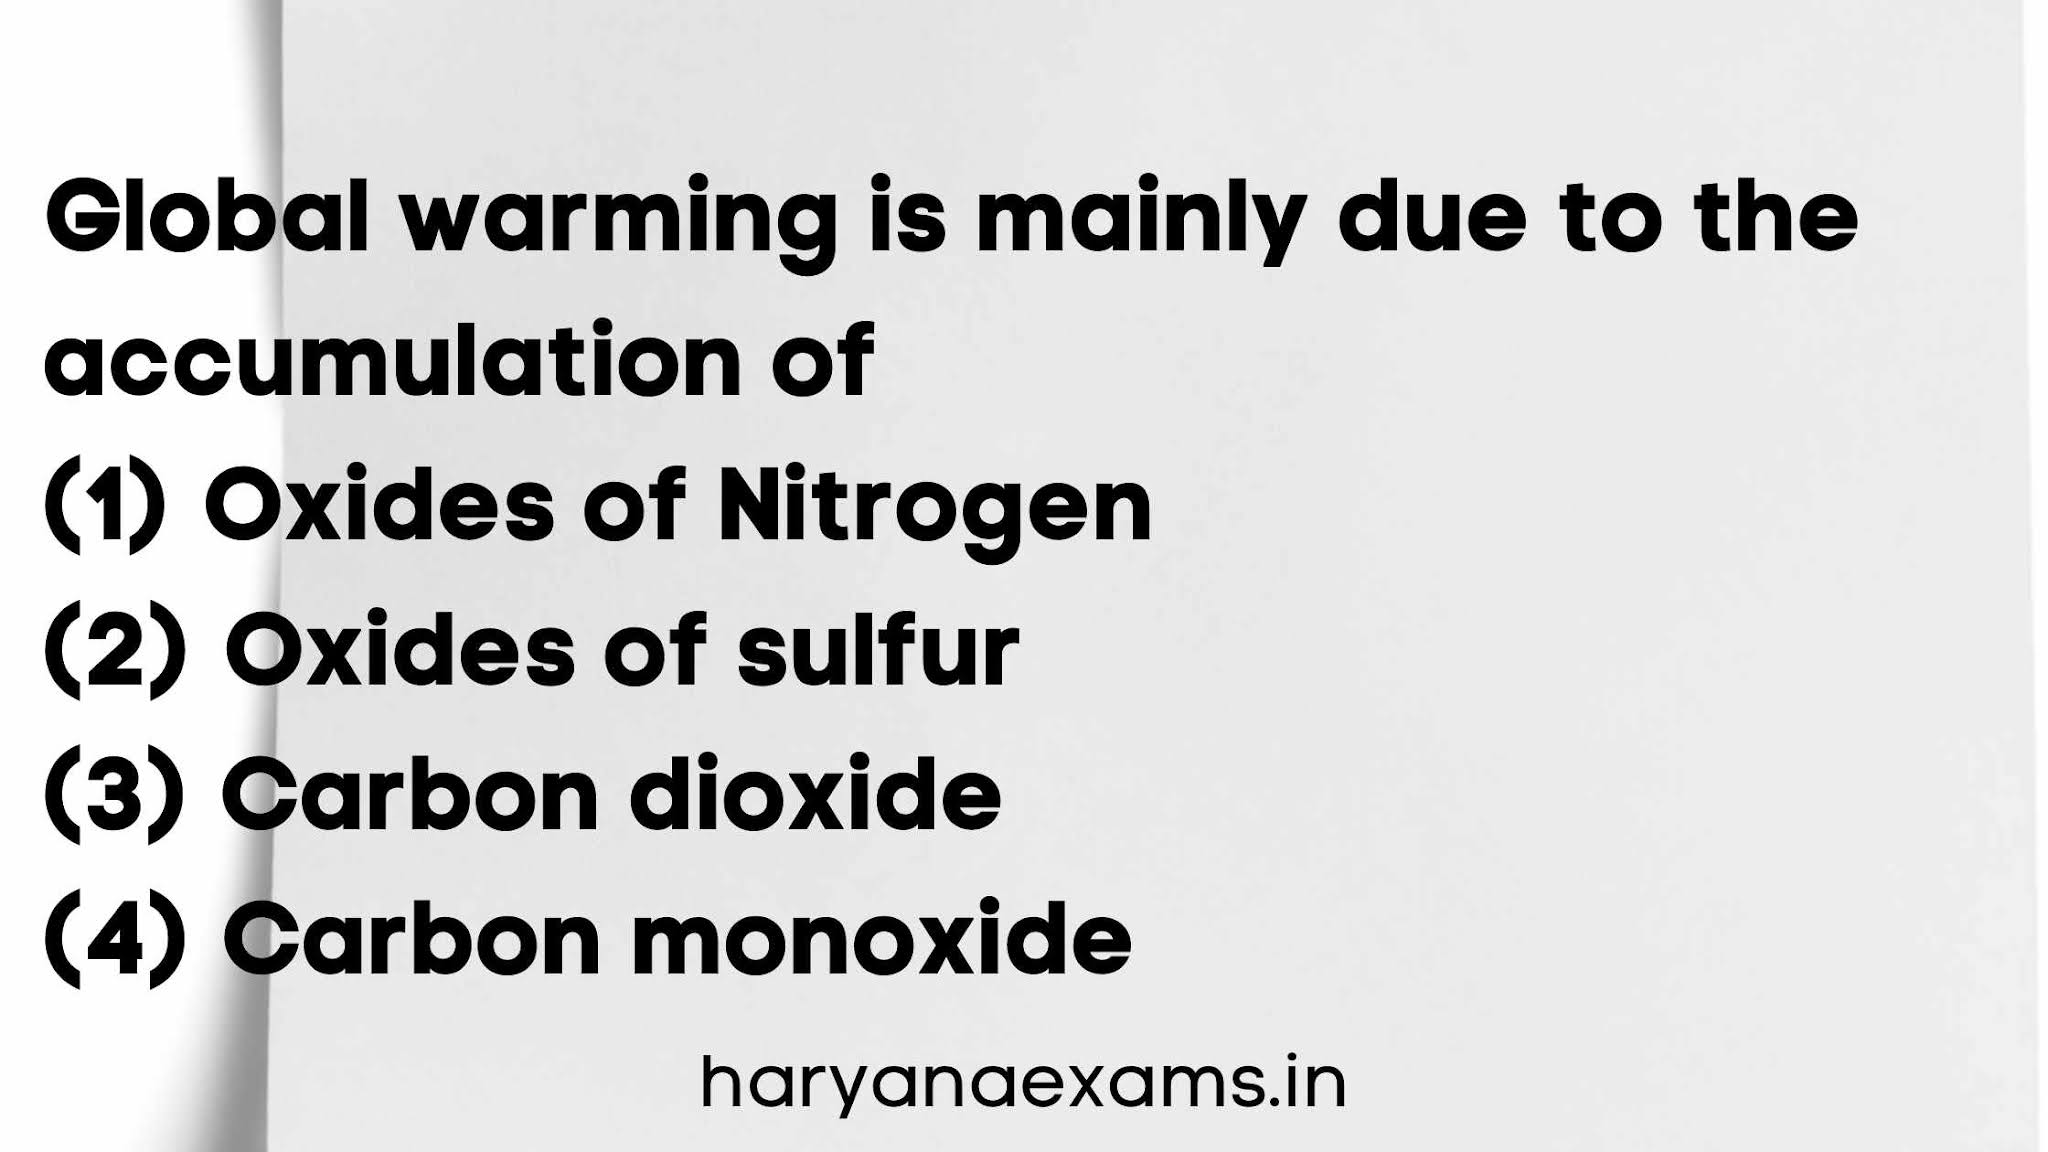 Global warming is mainly due to the accumulation of   (1) Oxides of Nitrogen   (2) Oxides of sulfur   (3) Carbon dioxide   (4) Carbon monoxide